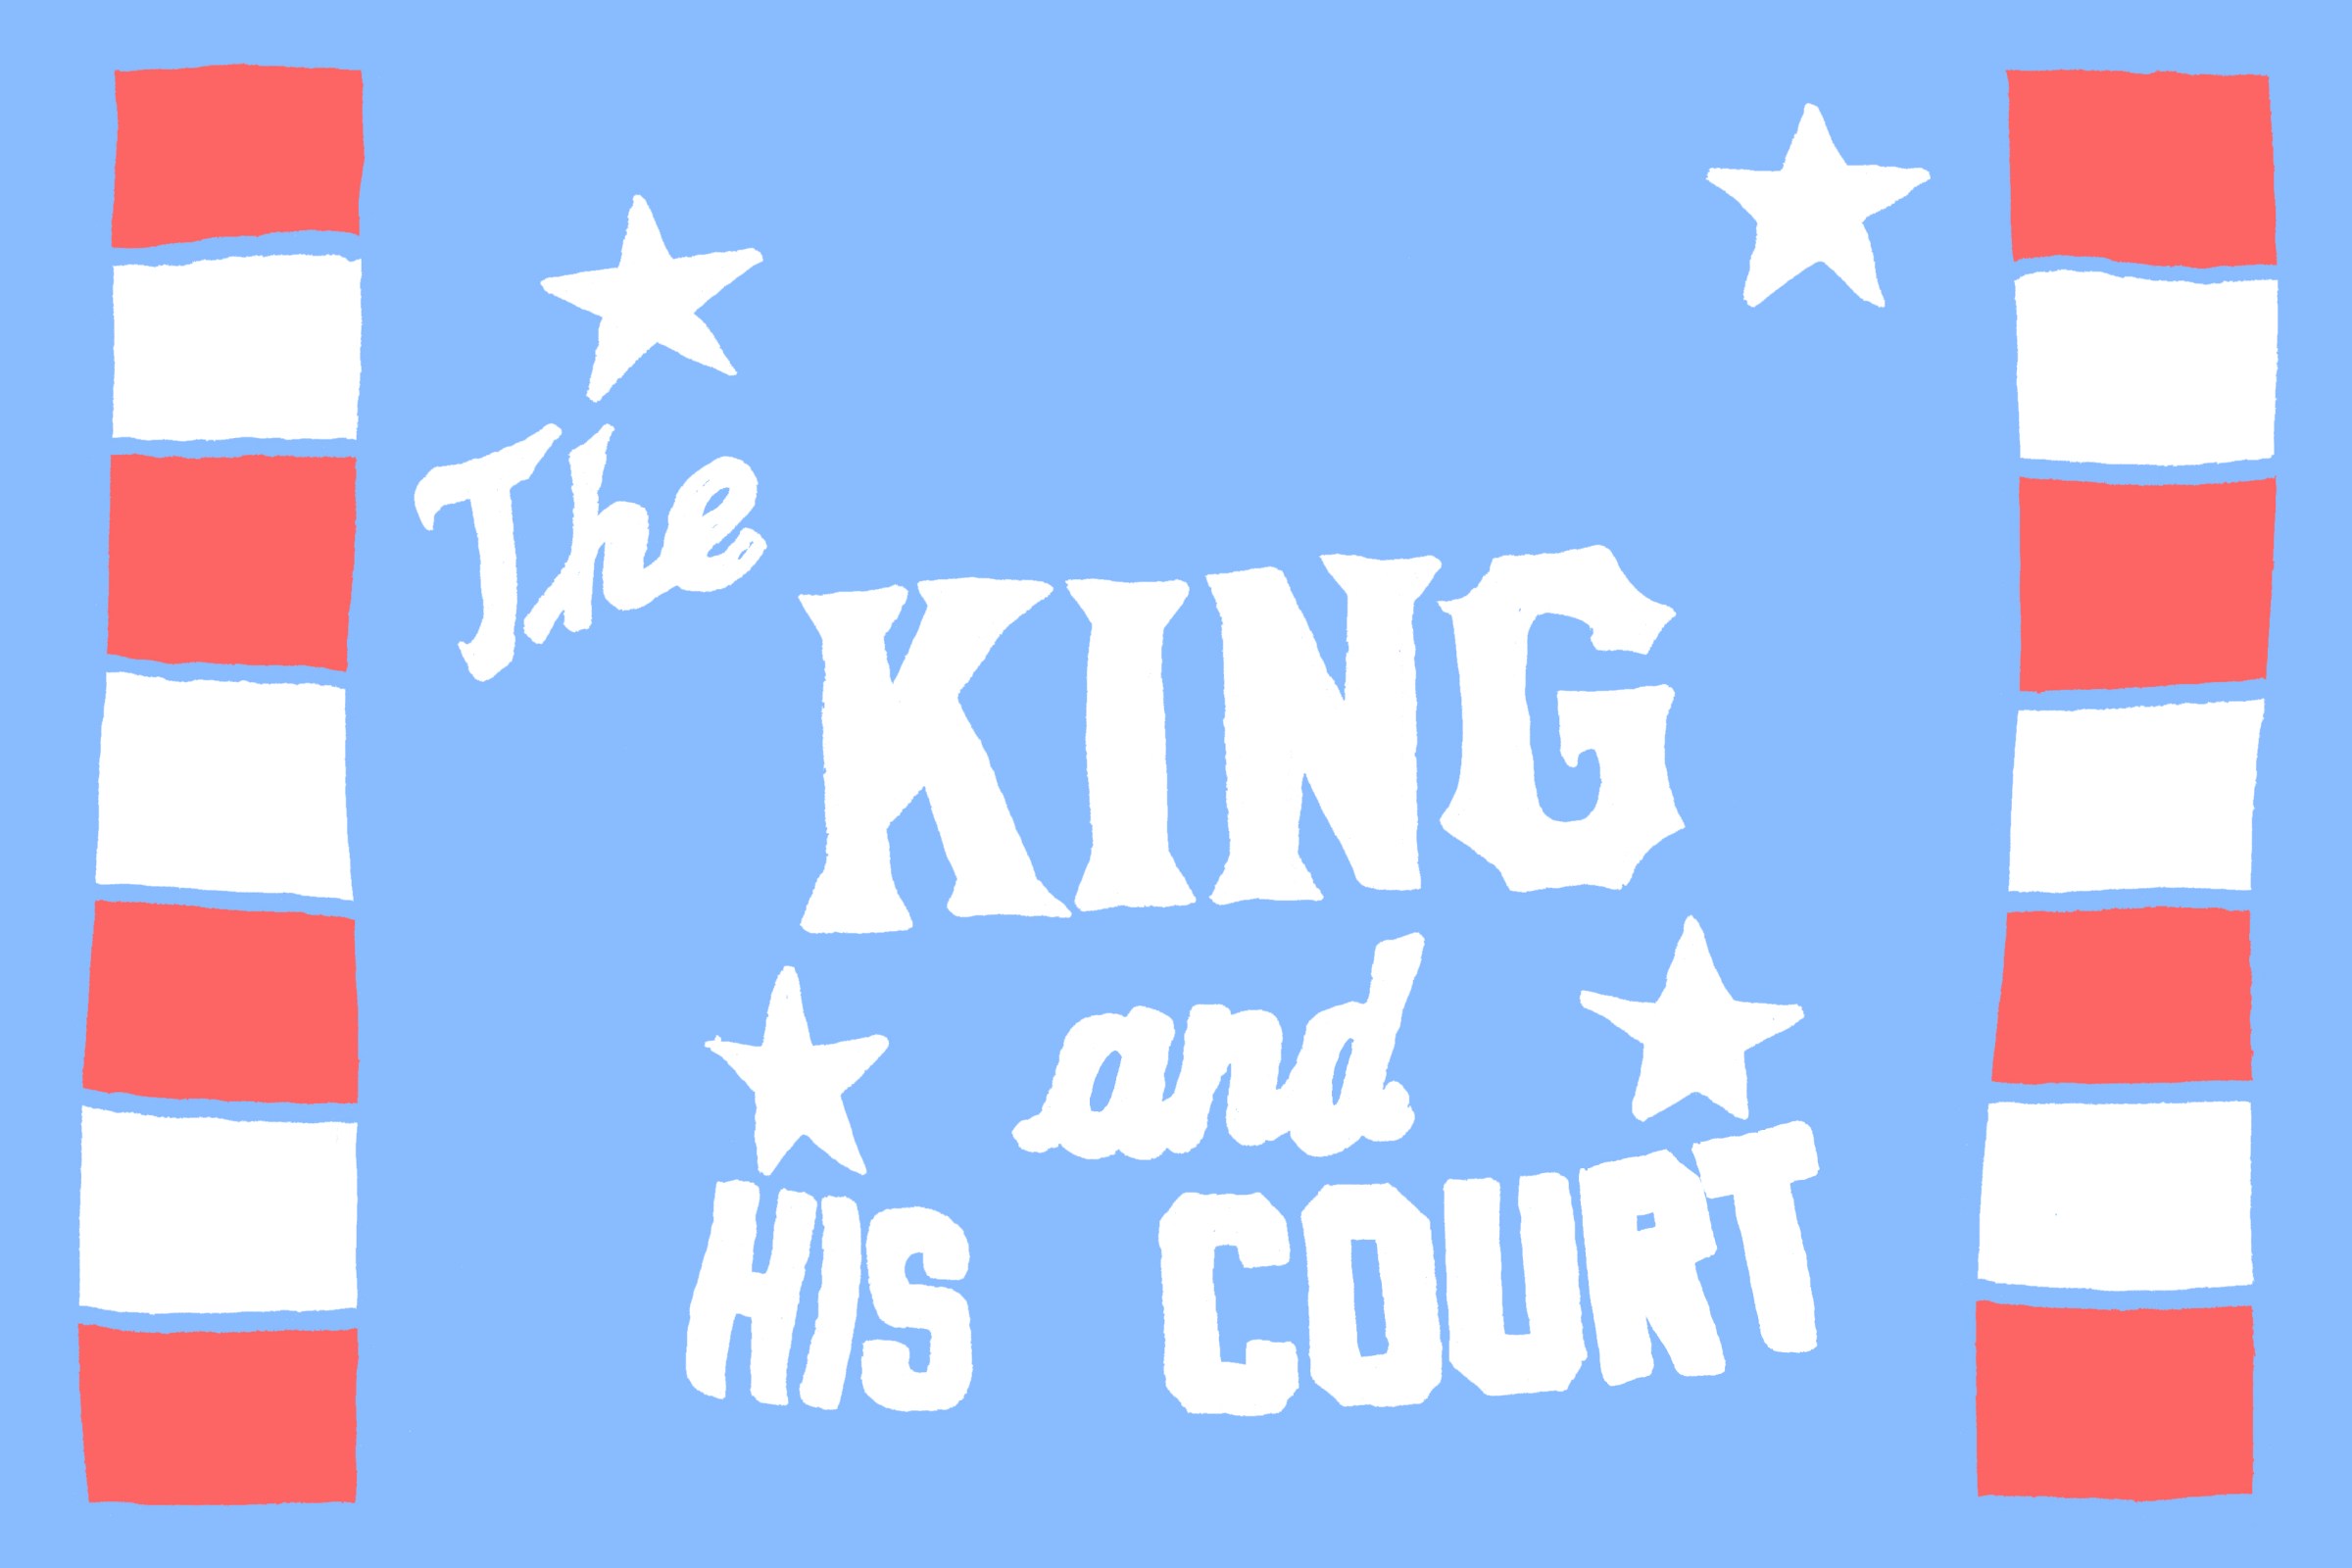 An illustration by Adam Villacin of Eddie Feigner's barnstorming softball crew "The King And His Court"